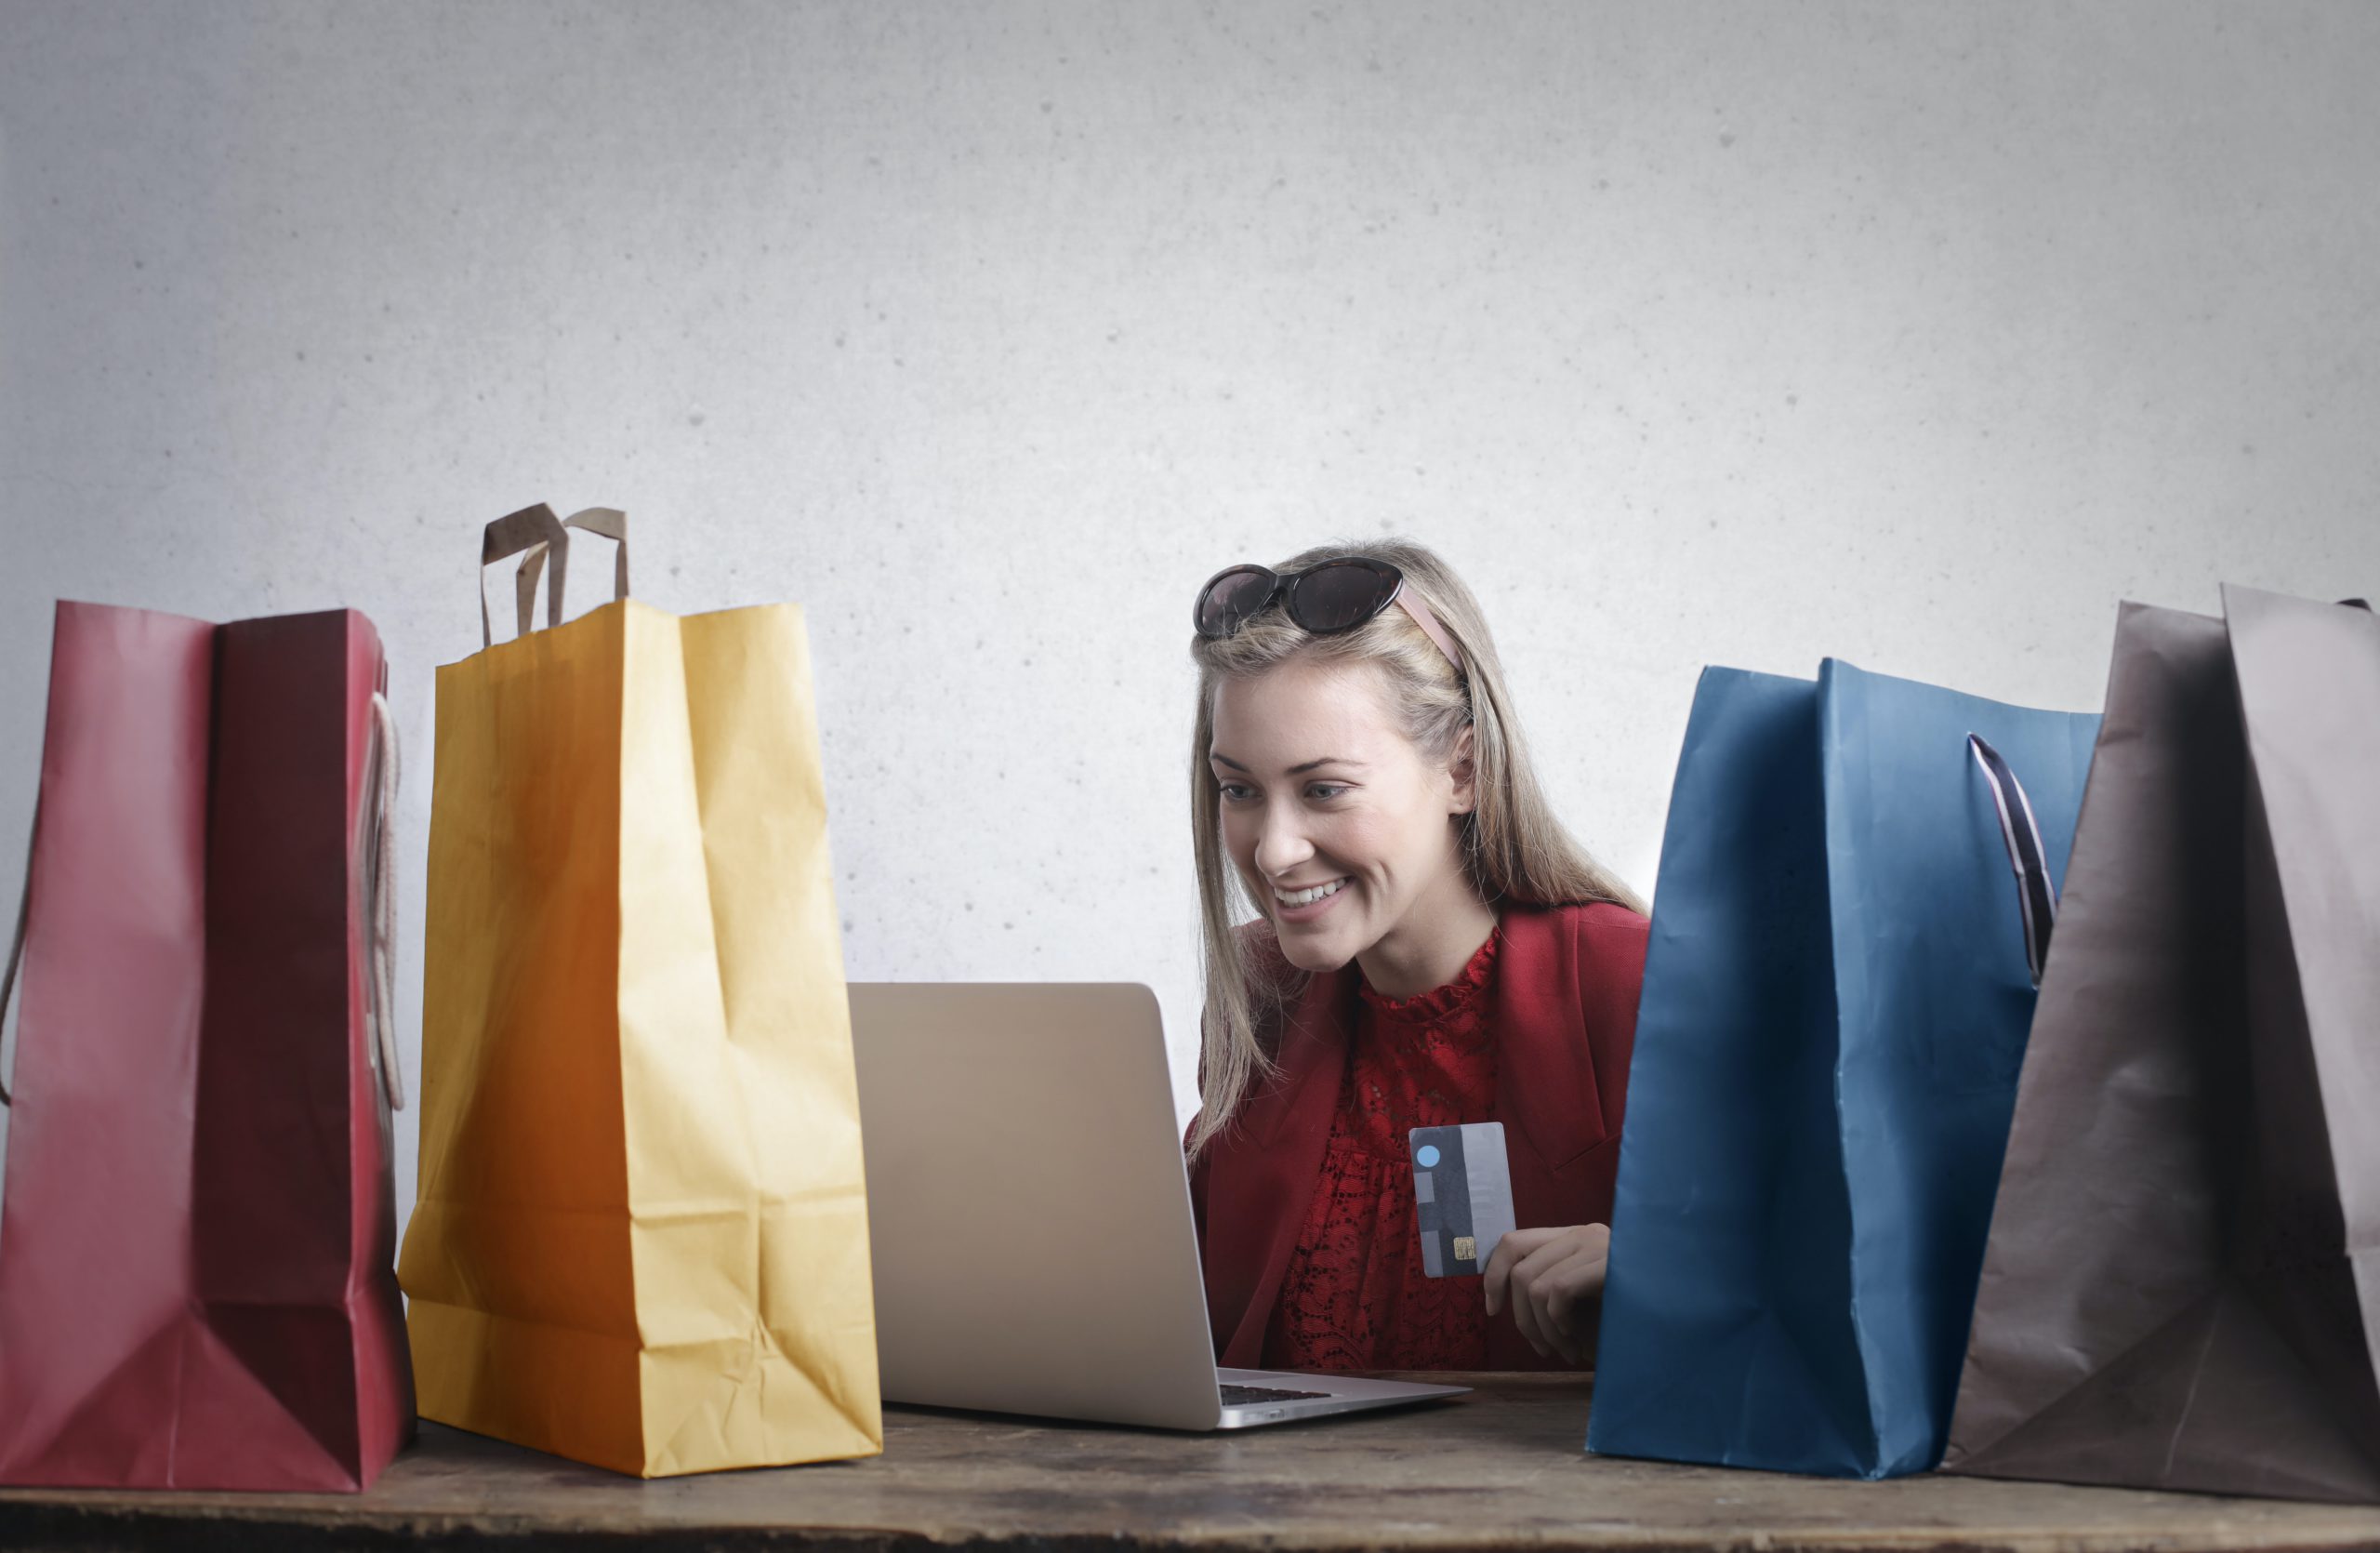 Your Ultimate Online Shopping Guide Without Experiencing the Pitfalls